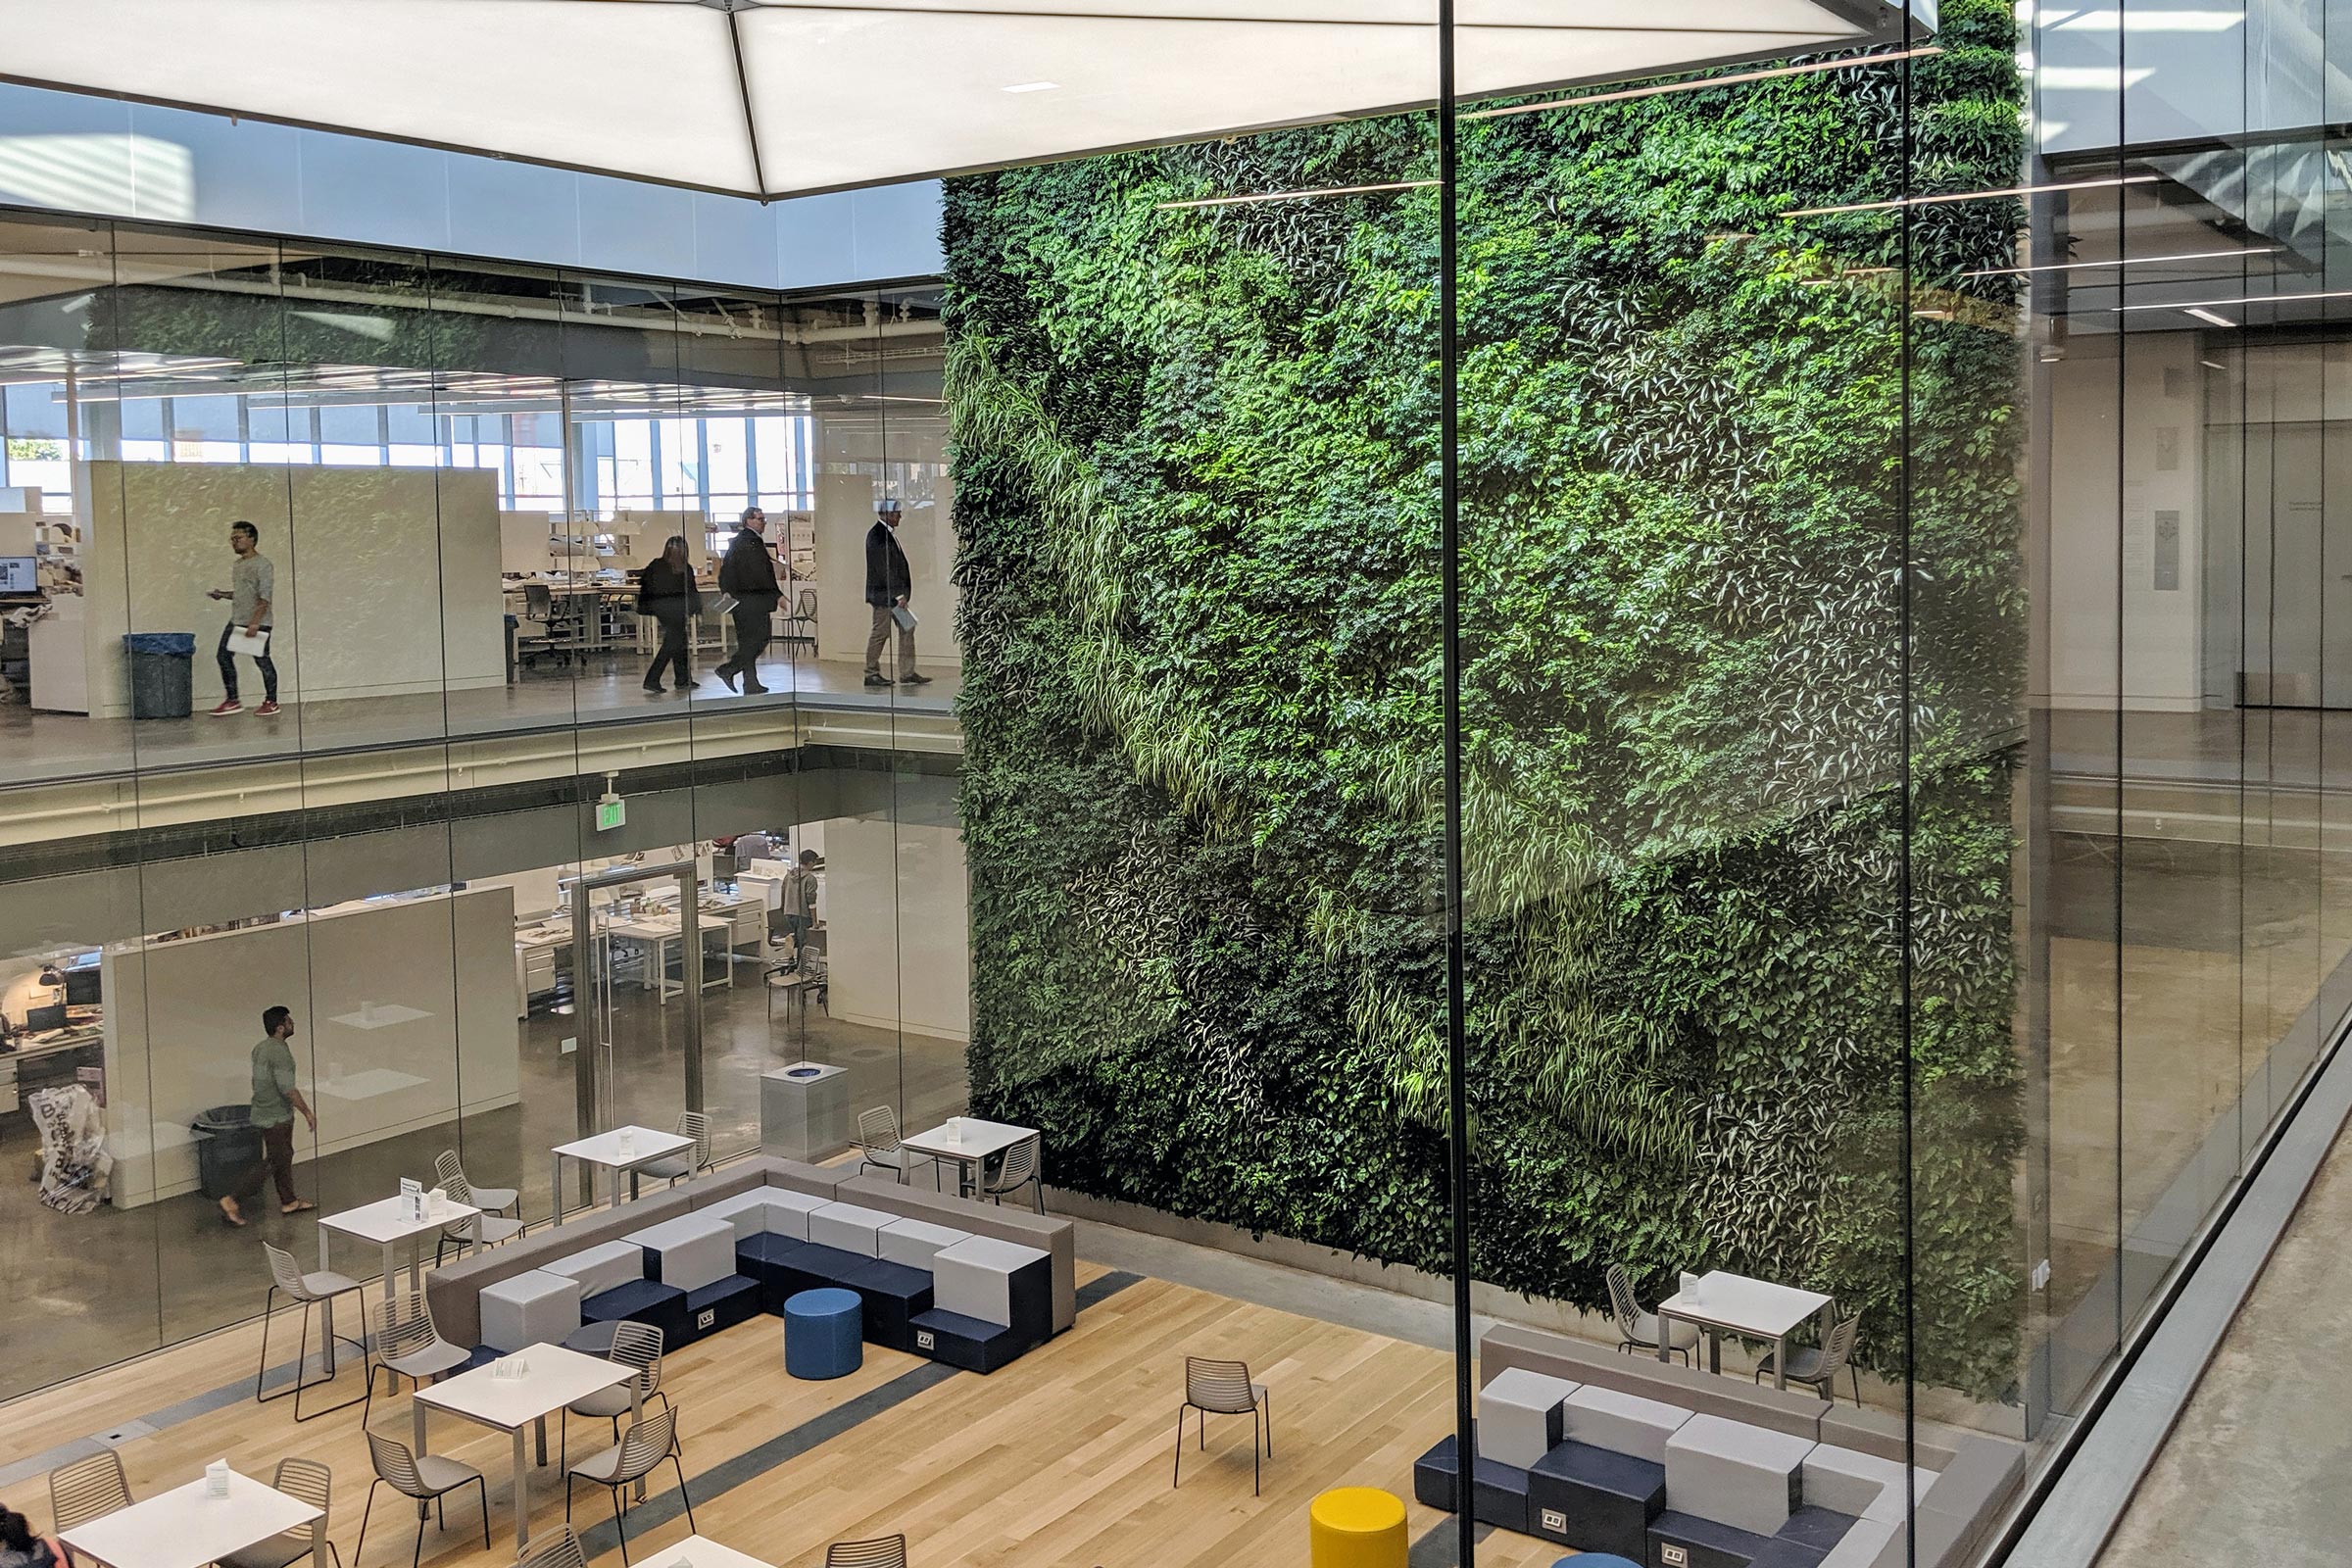 How to Incorporate Biophilic Design in Any Space